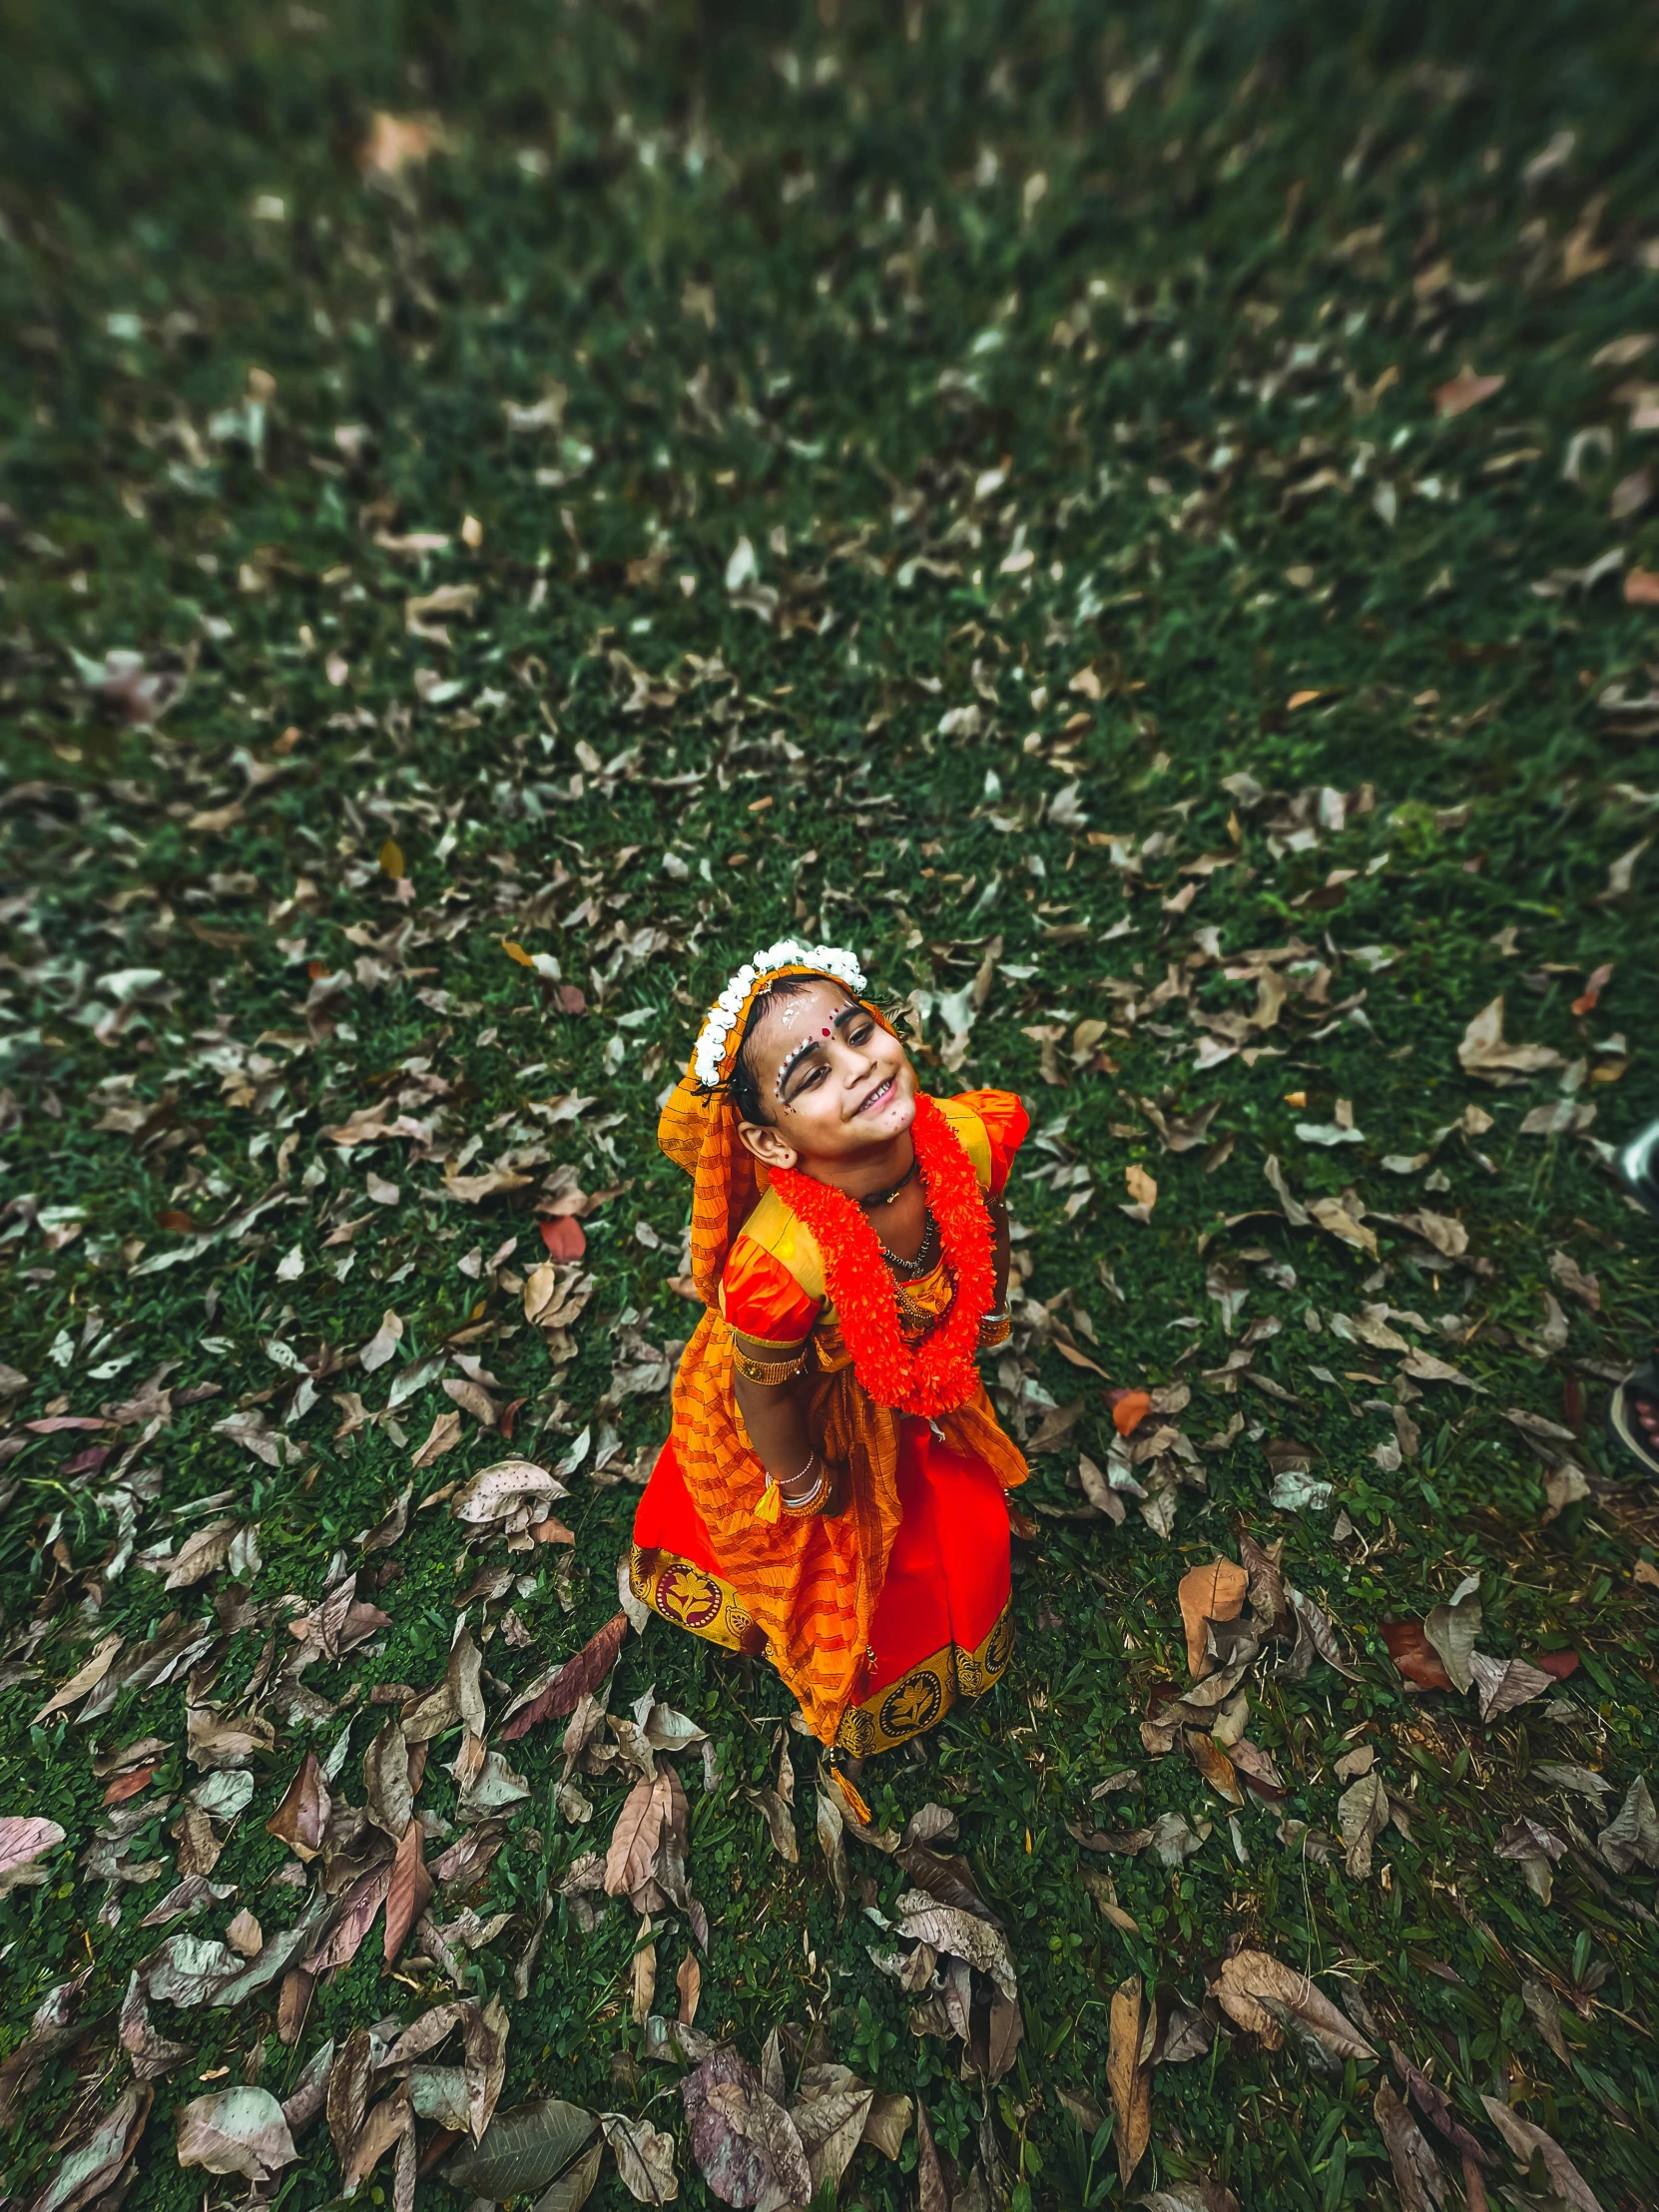 a  dressed in orange with red outfit sitting in grass